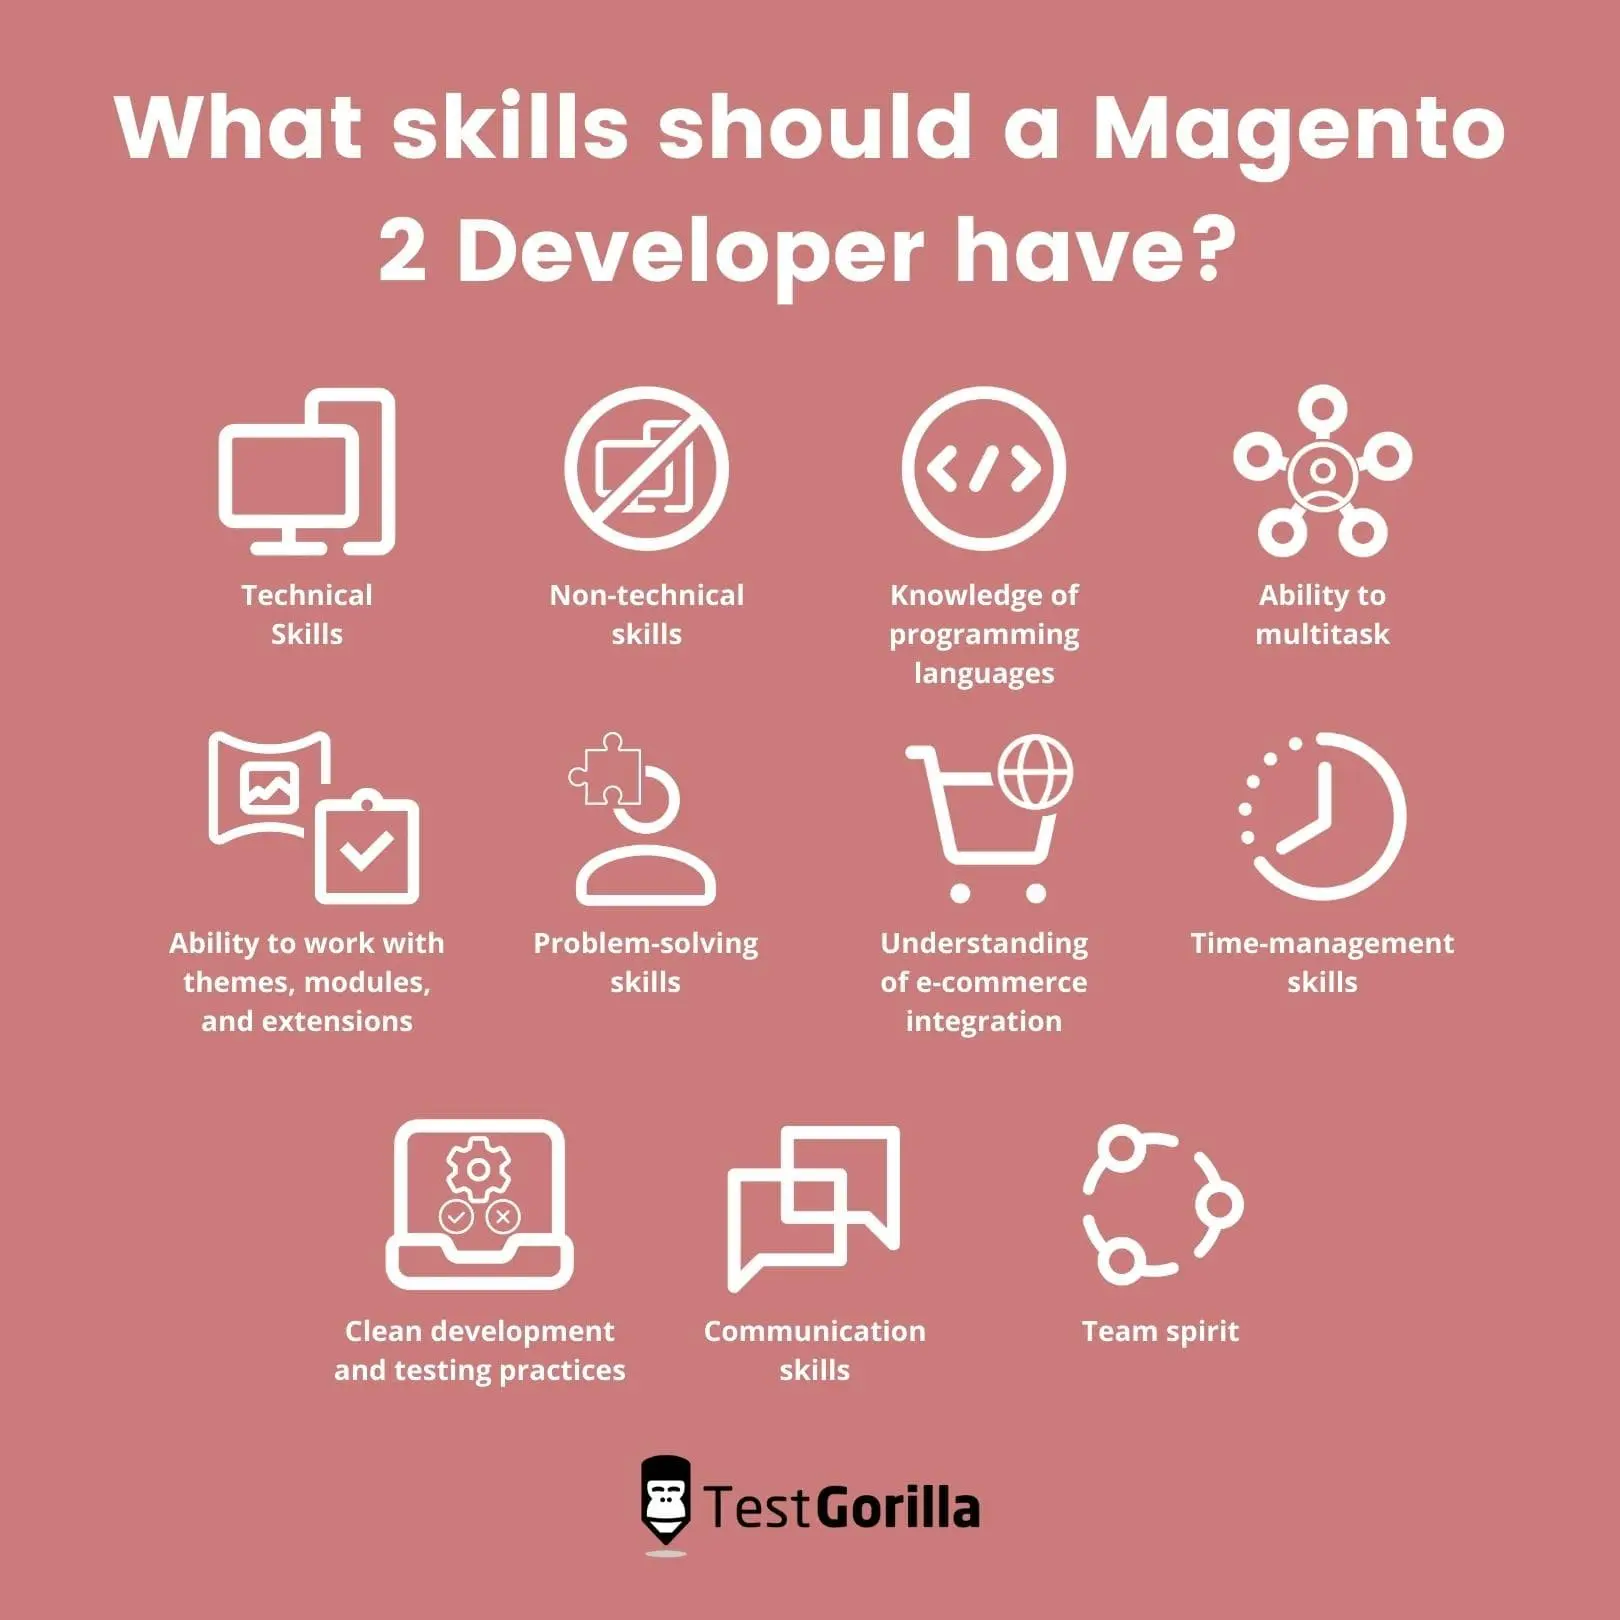 what skills should a top Magento 2 developer have?